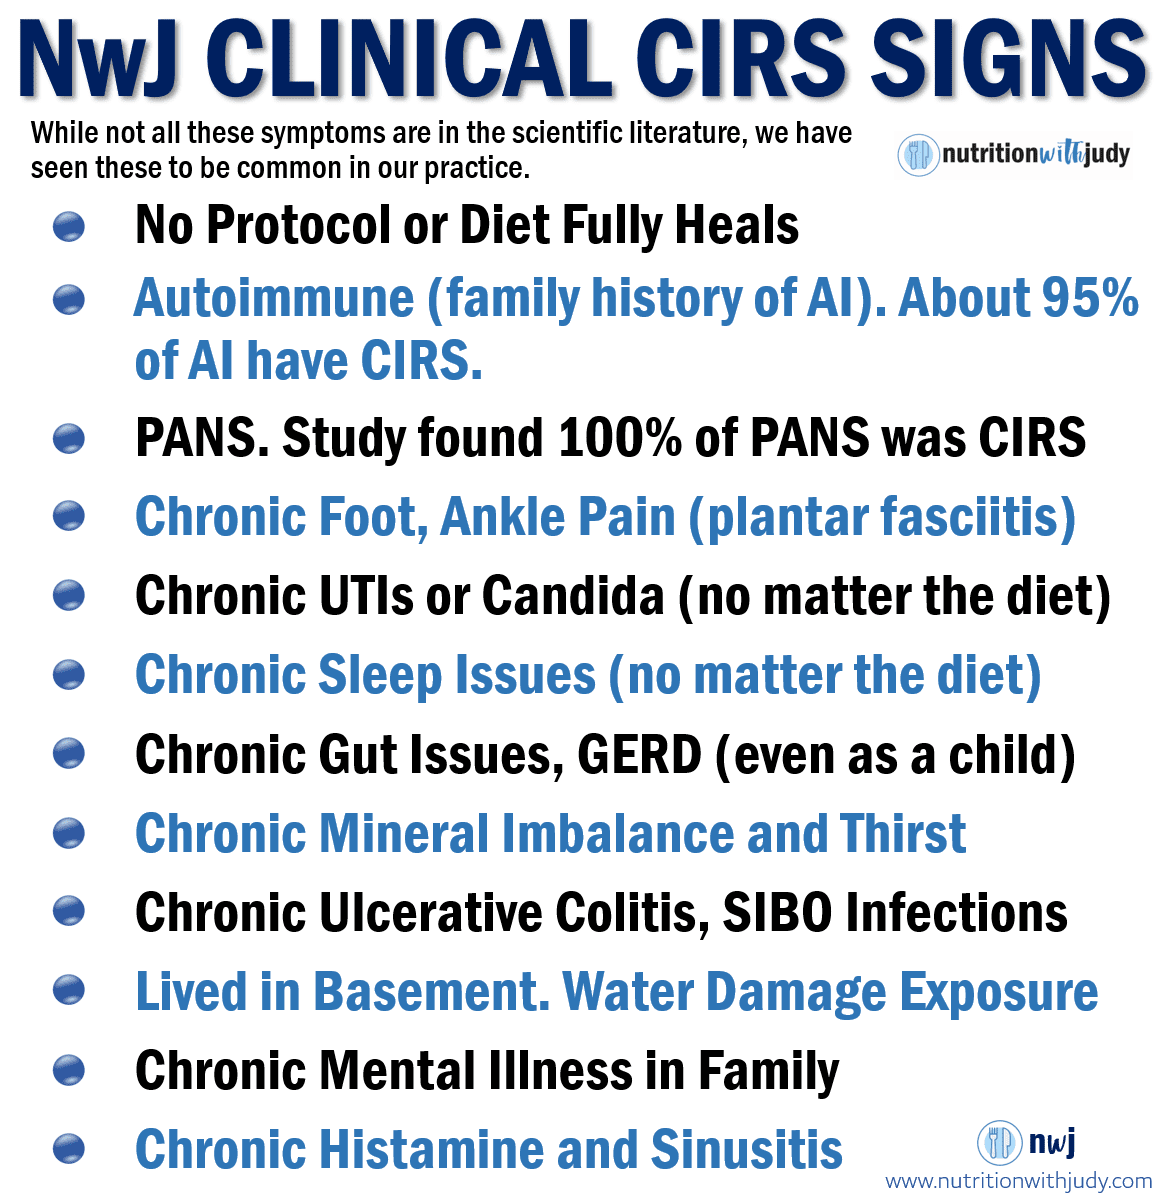 cirs clinical signs